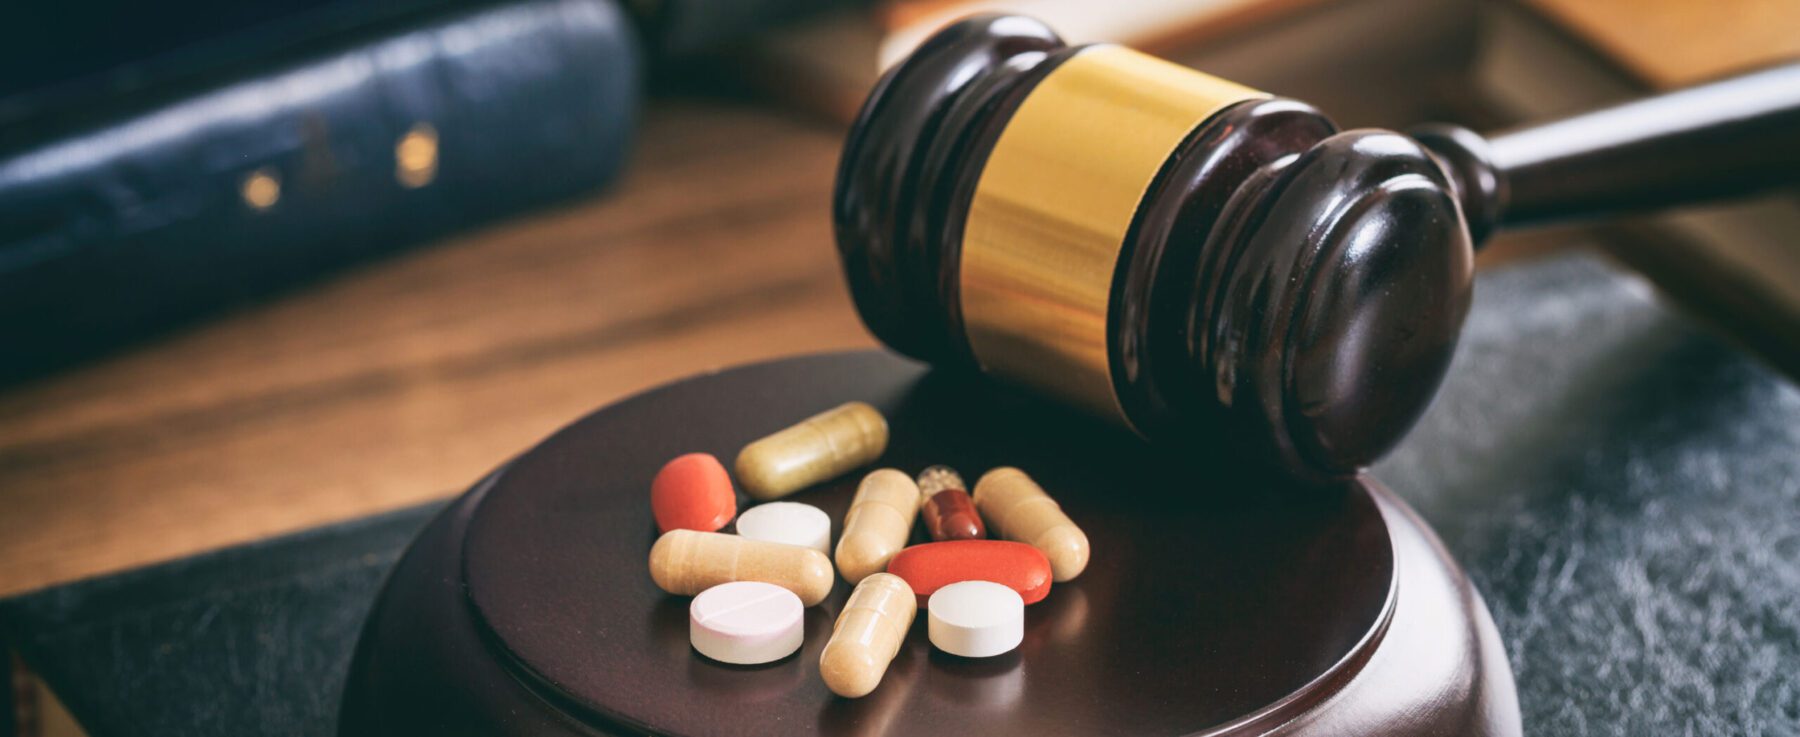 Judge's gavel with pills and drugs next to it